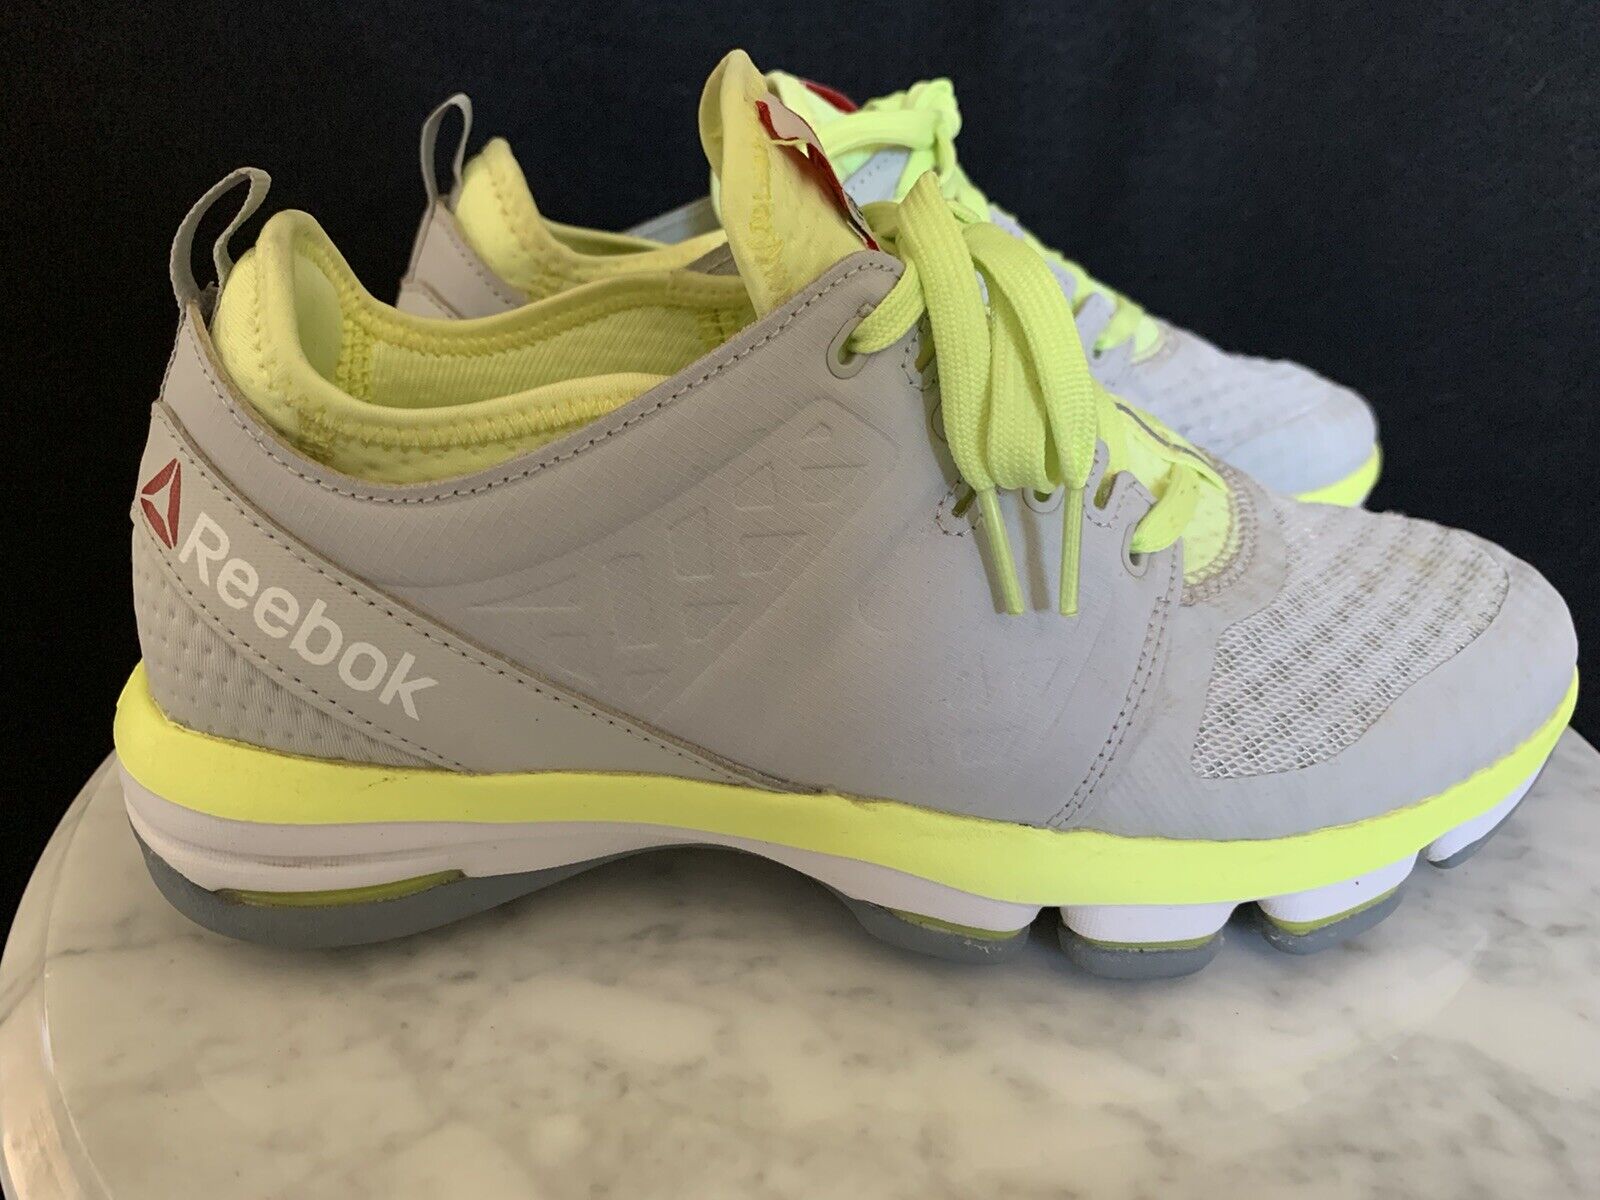 Can These Reebok Sneakers Improve Your Memory and Comfort: 10 Surprising Facts About Reebok